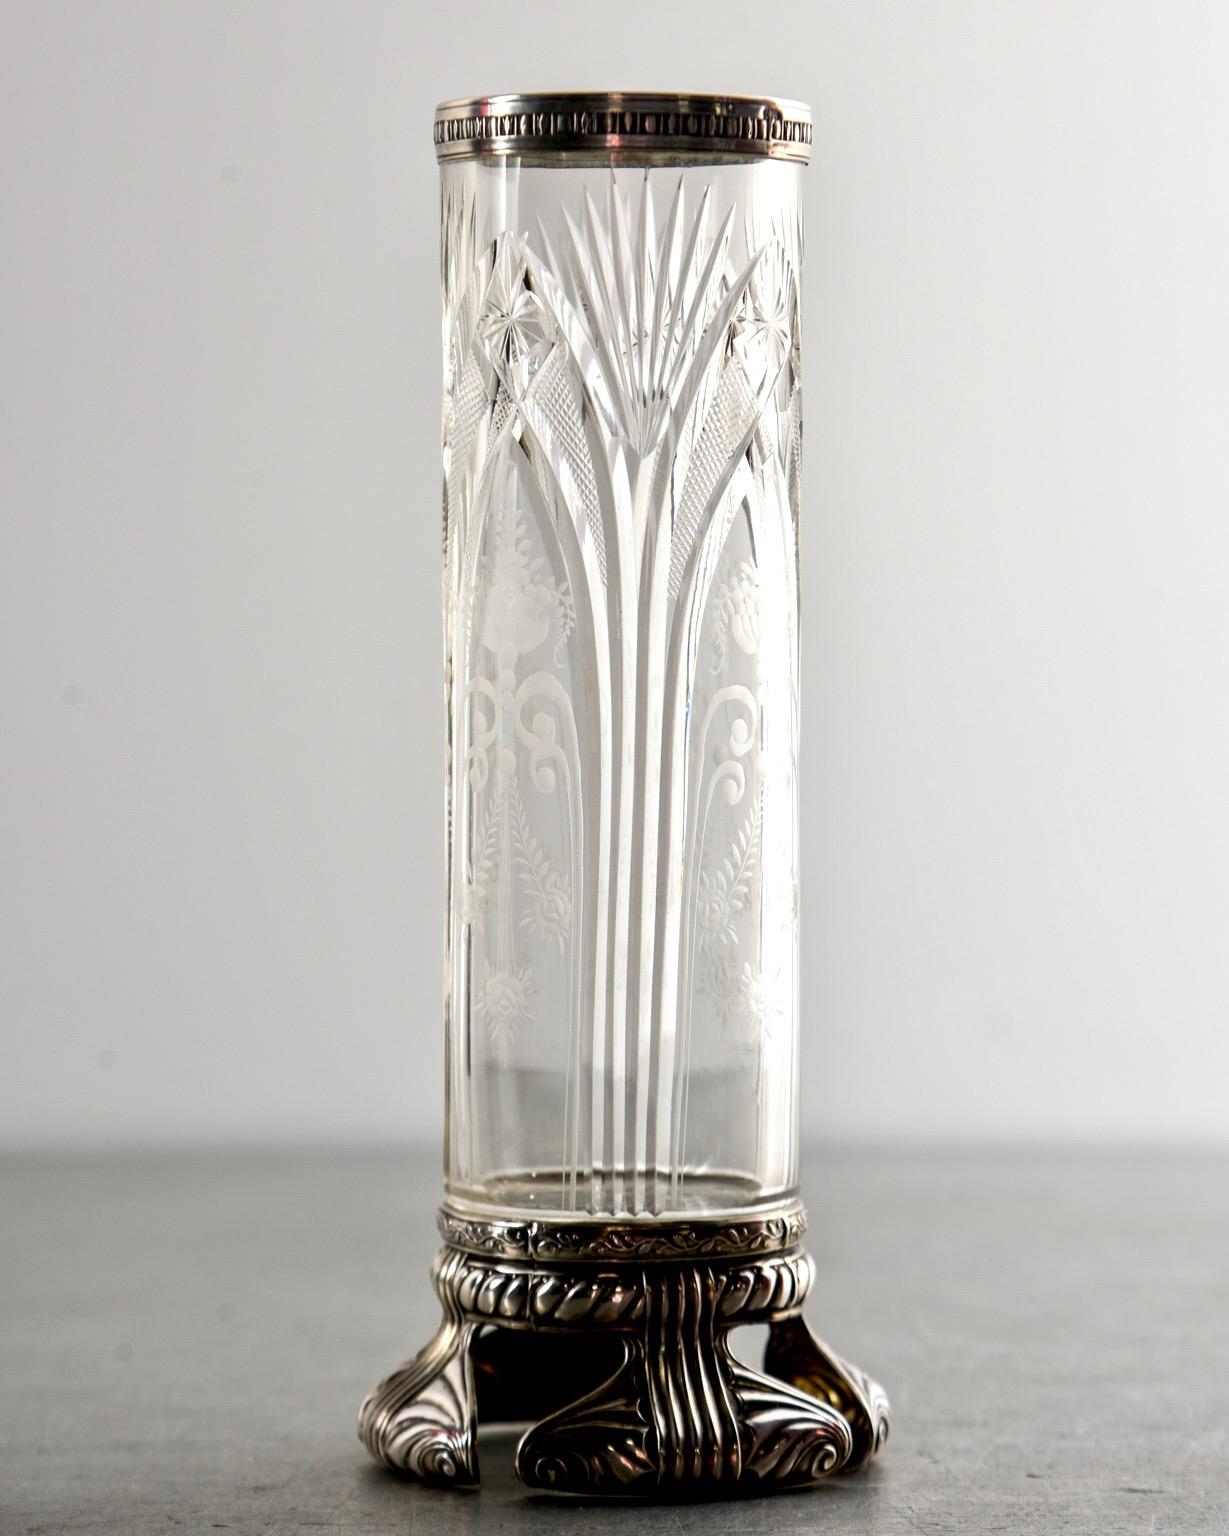 Art Deco era crystal and sterling vase features a cut design of tall, fanning sprays with etched foliate and floral detail, circa 1930s. Sterling silver rim and decorative, open work base. Marked as shown in detail photo. Unknown maker.

